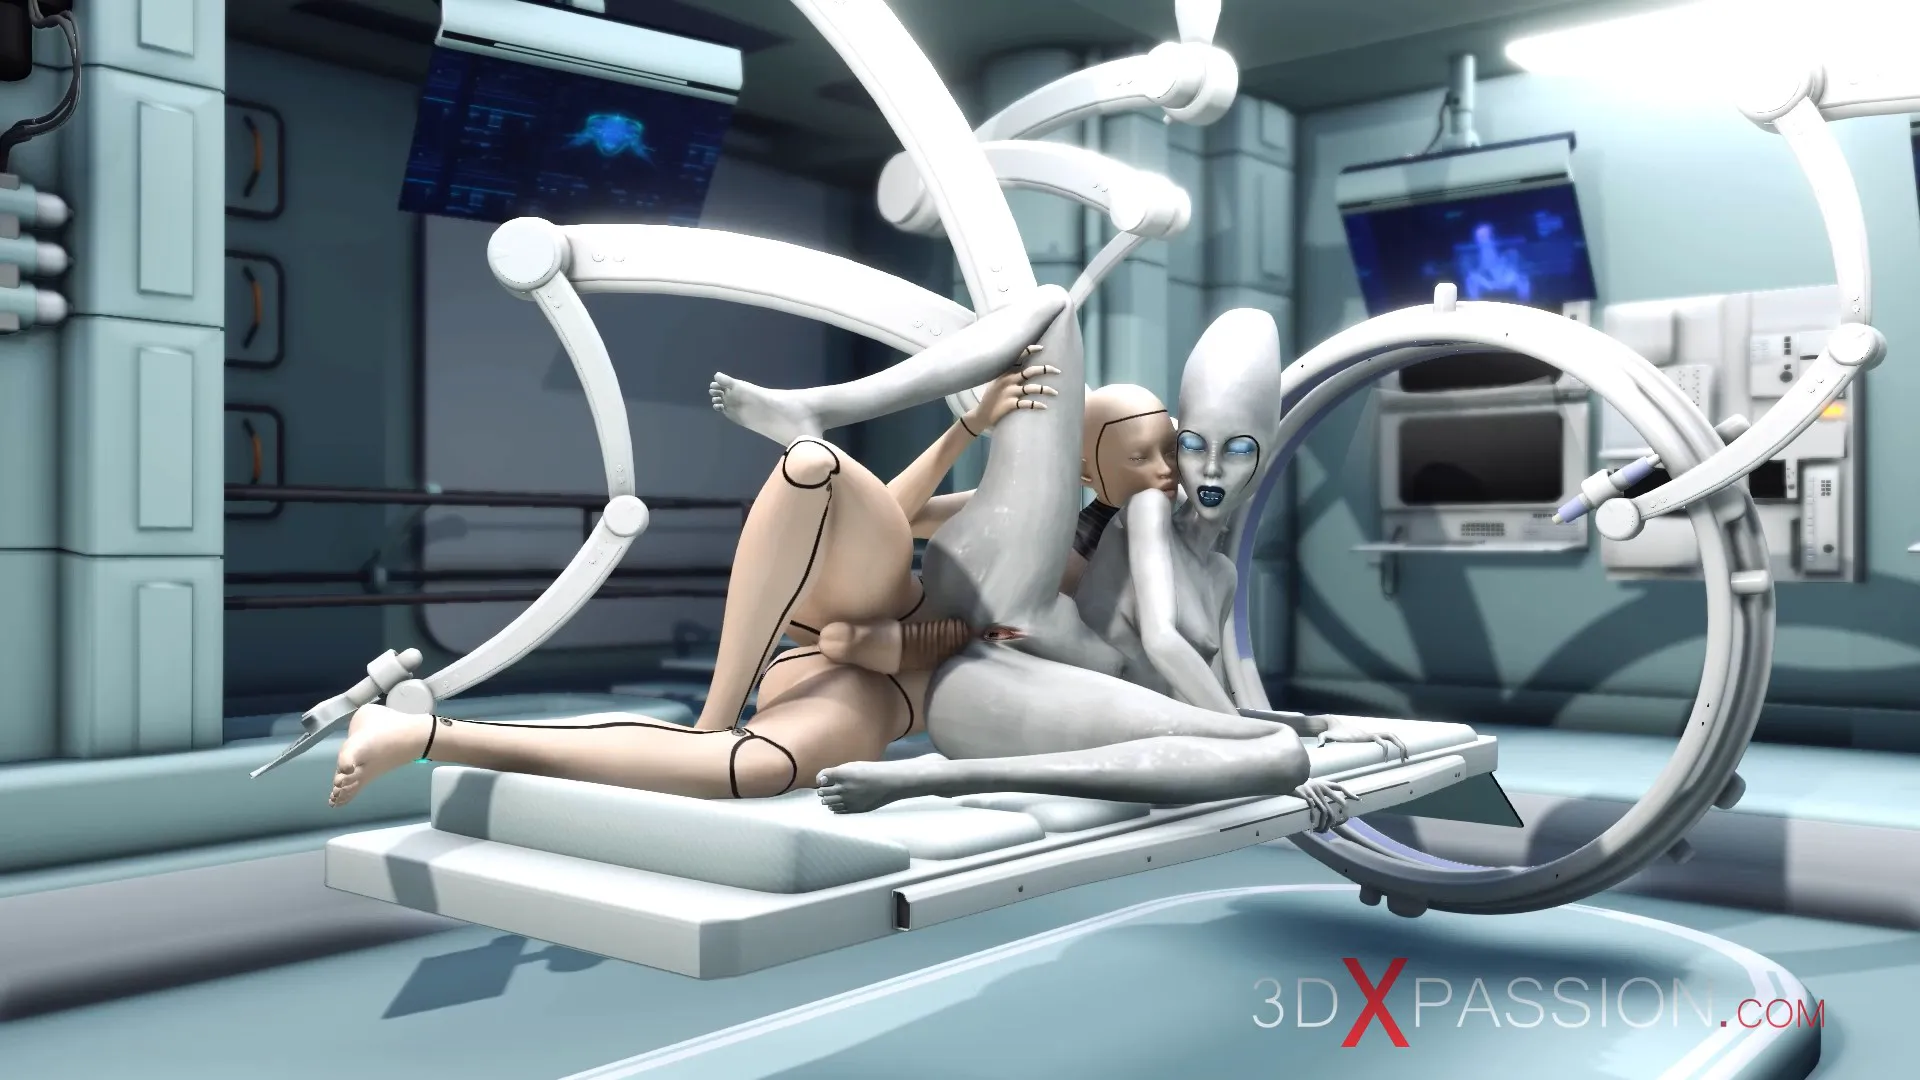 Sci-fi female android fucks alien surgery room space station